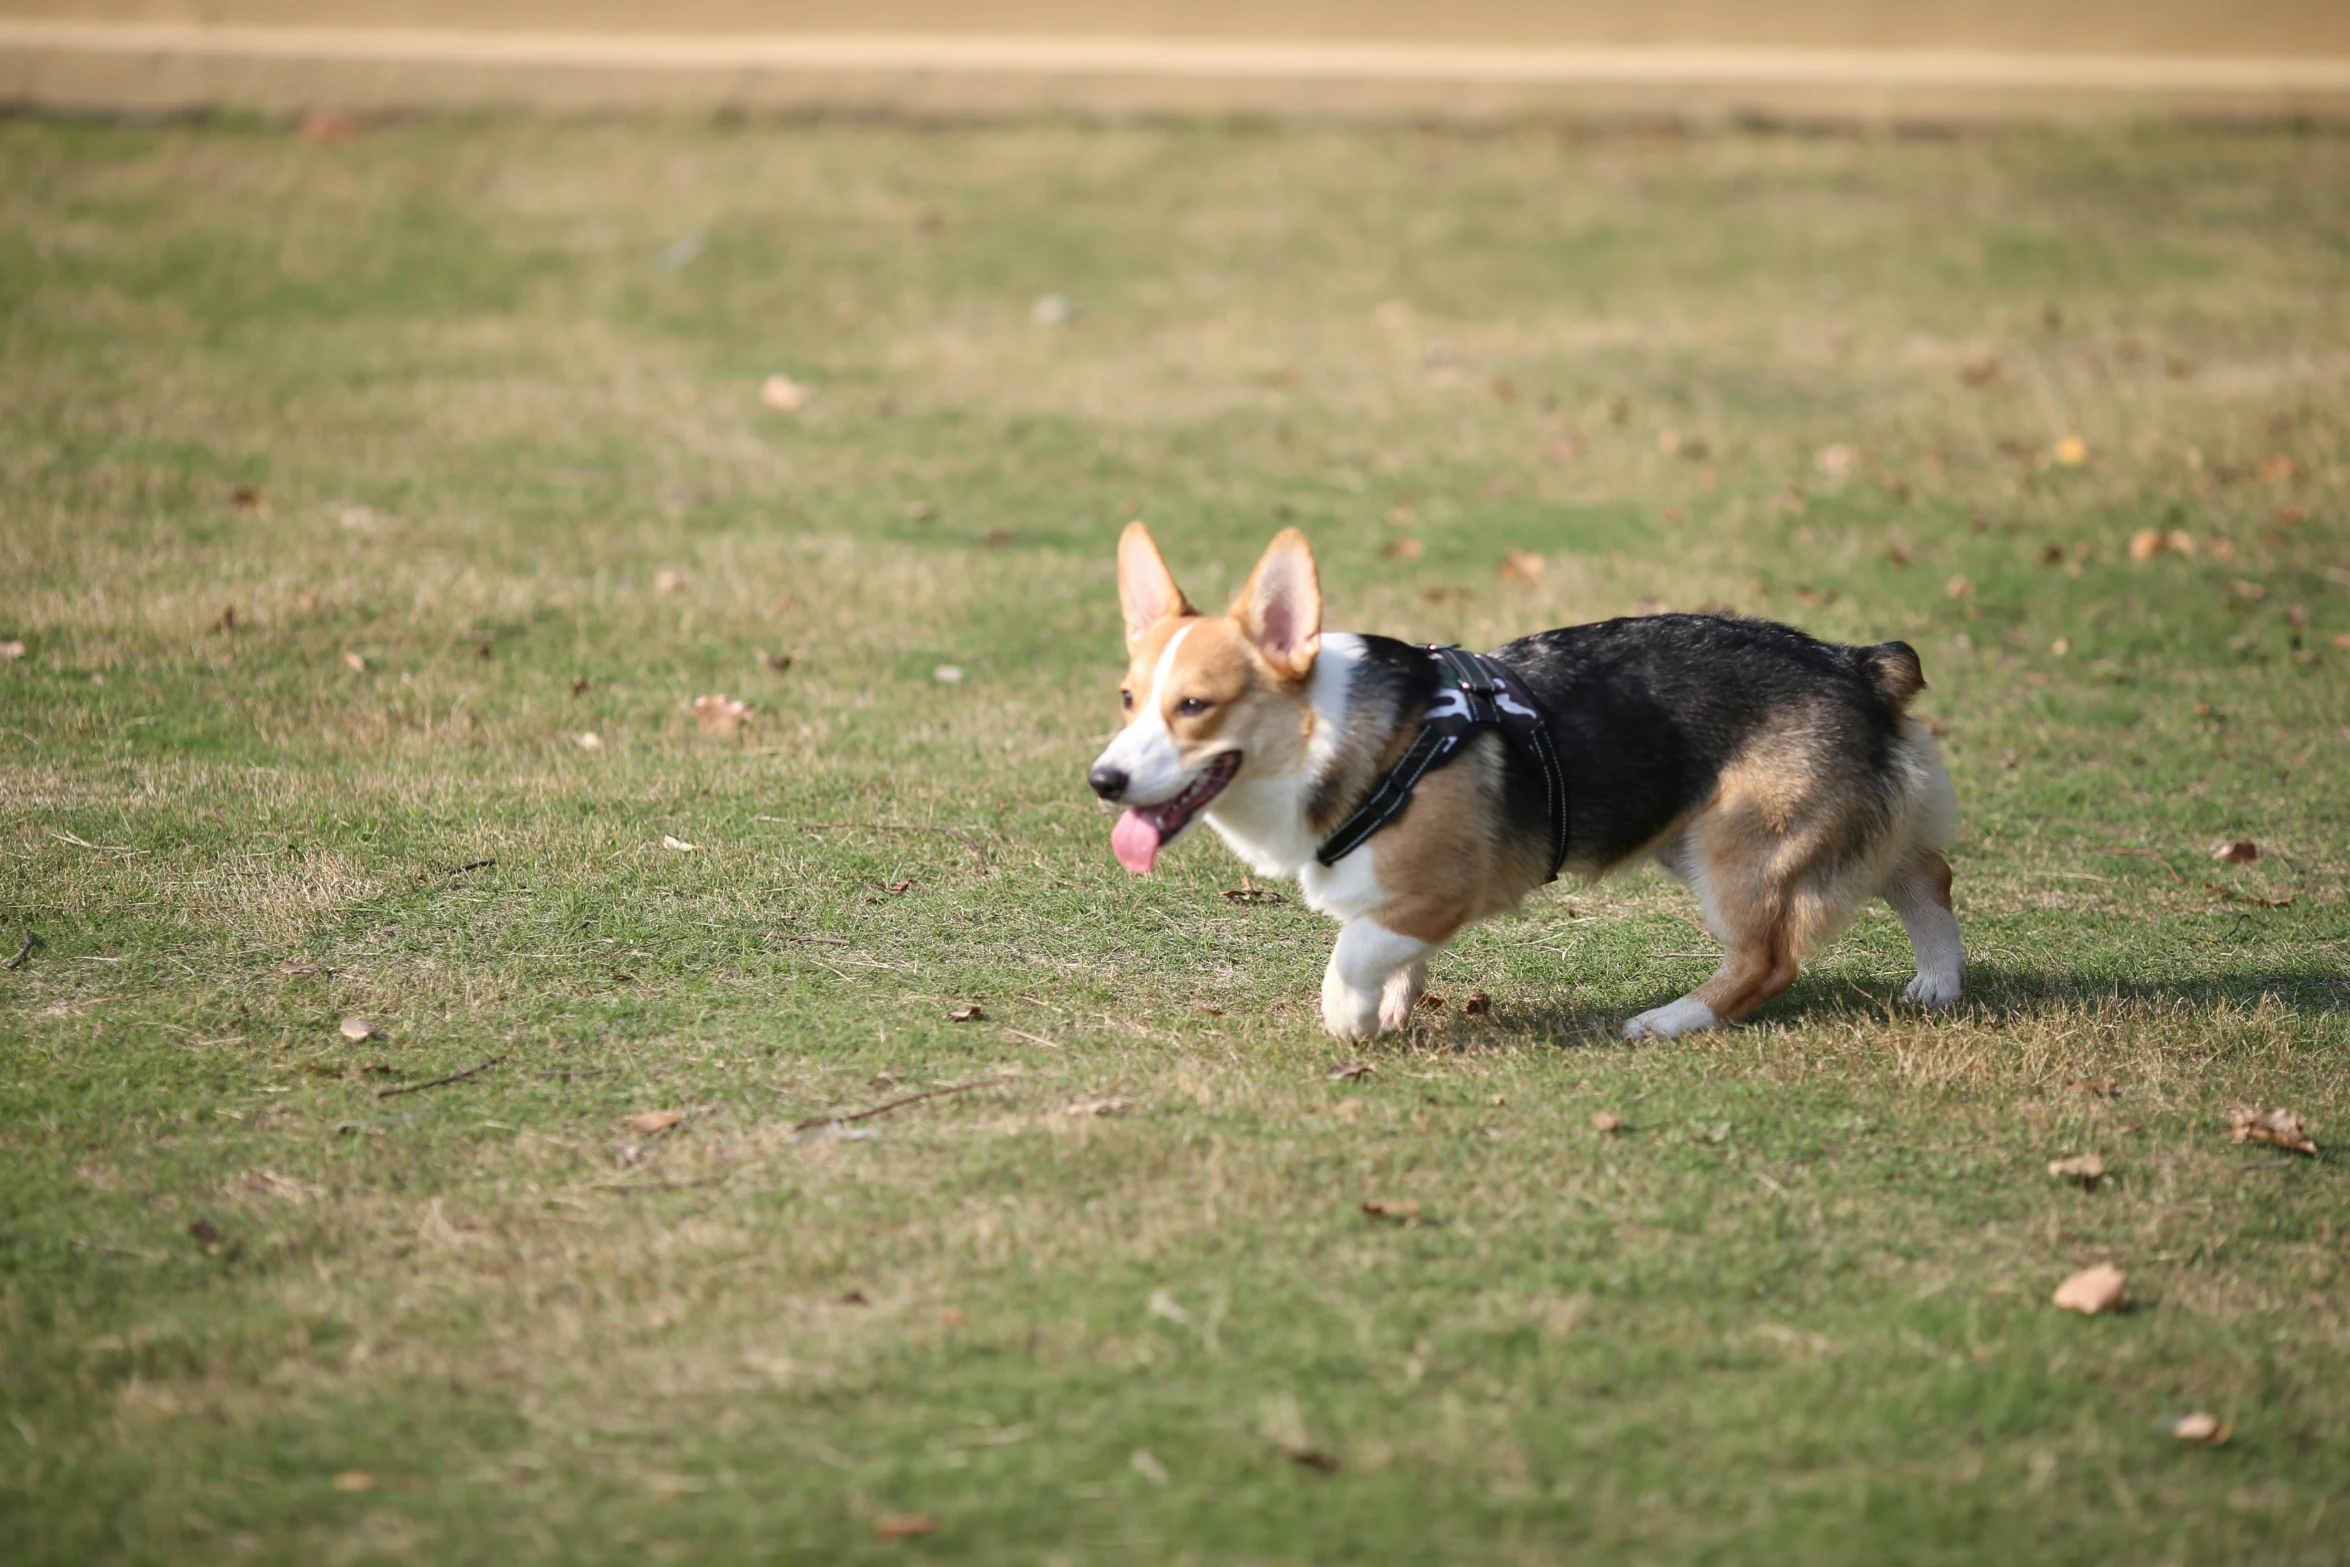 a little dog in the grass walking with its tongue out